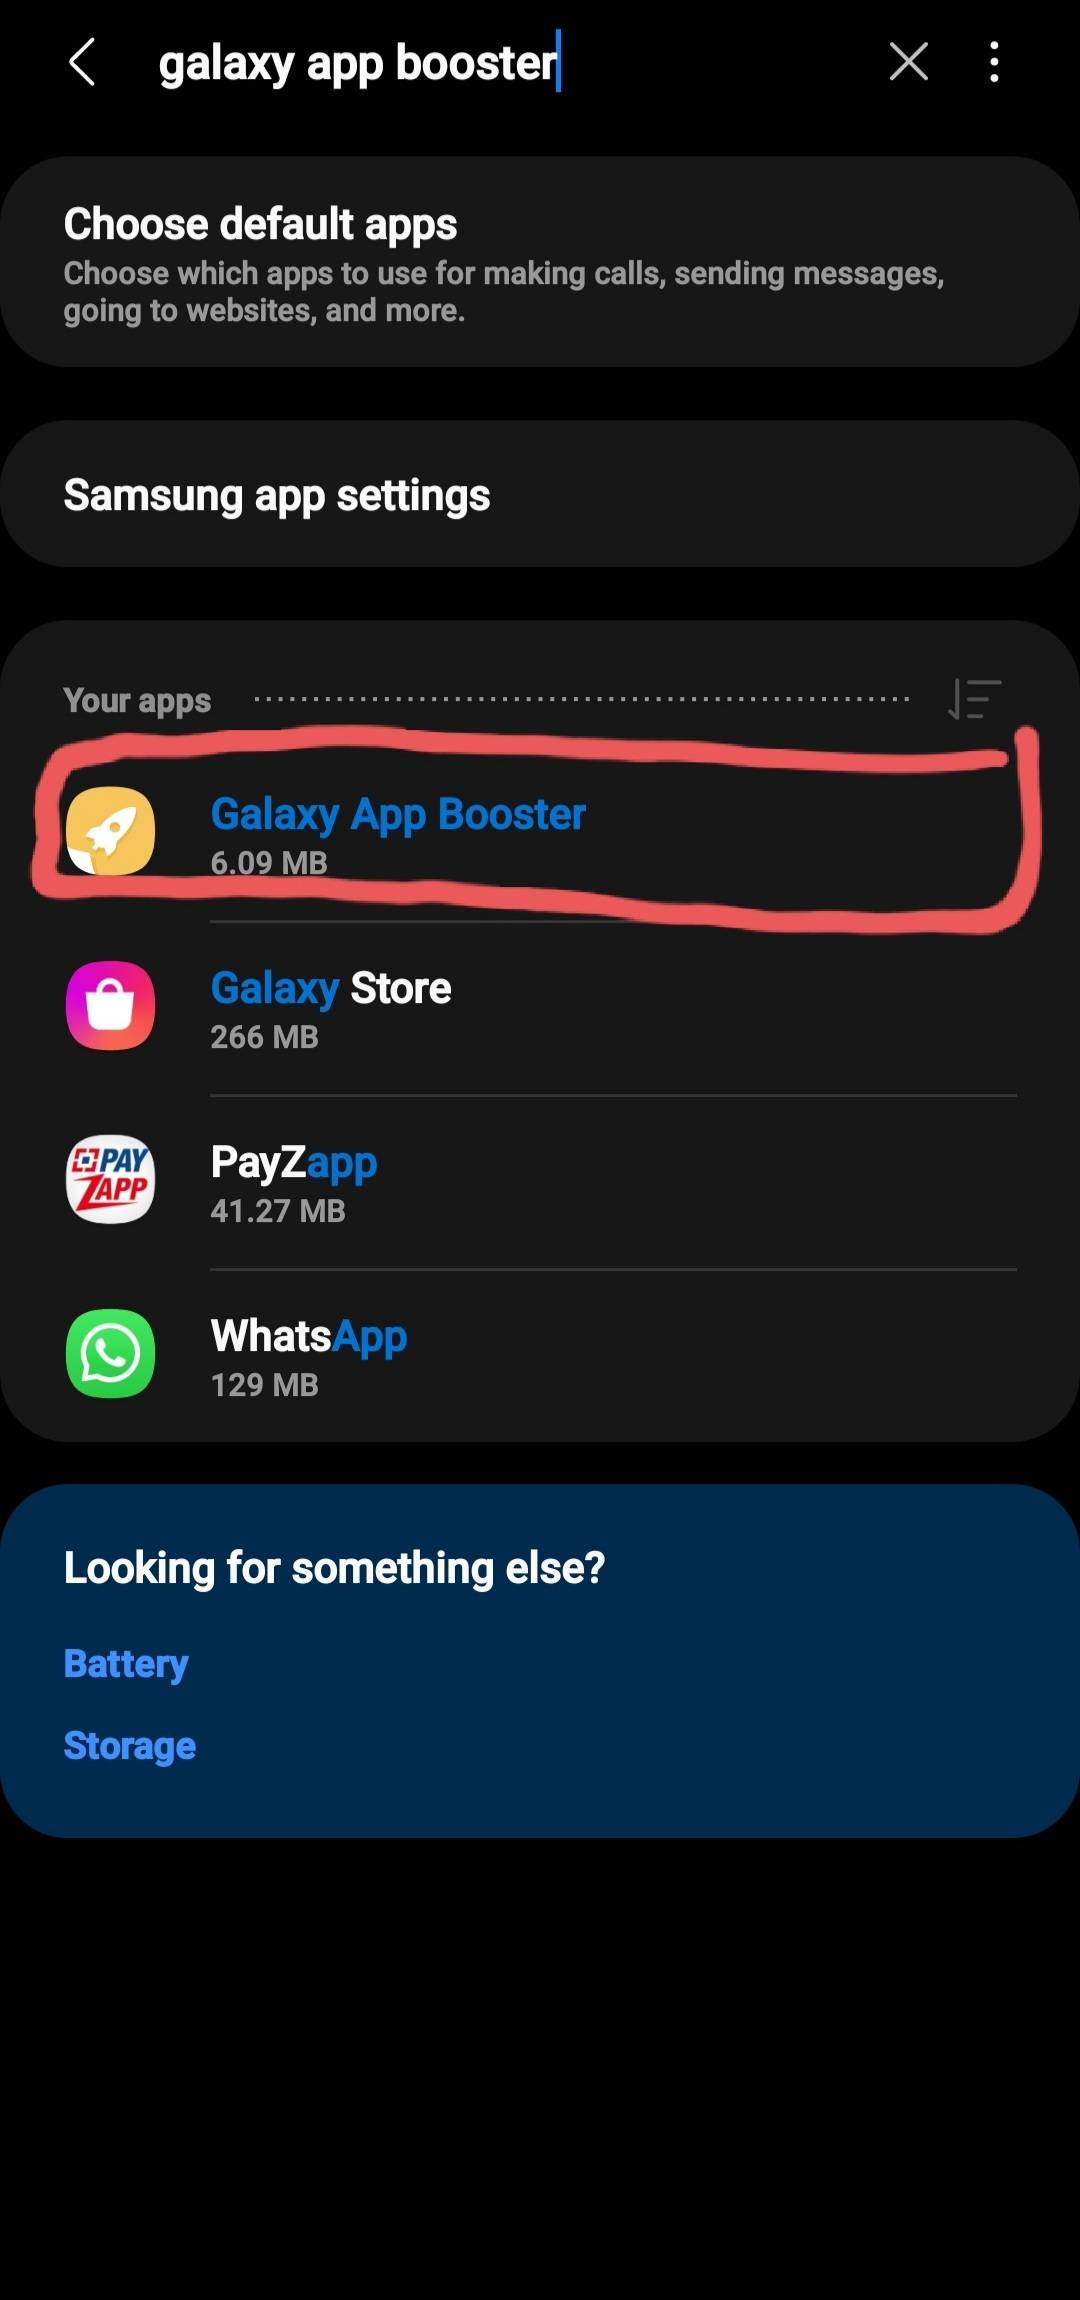 About Galaxy app booster - Samsung Members